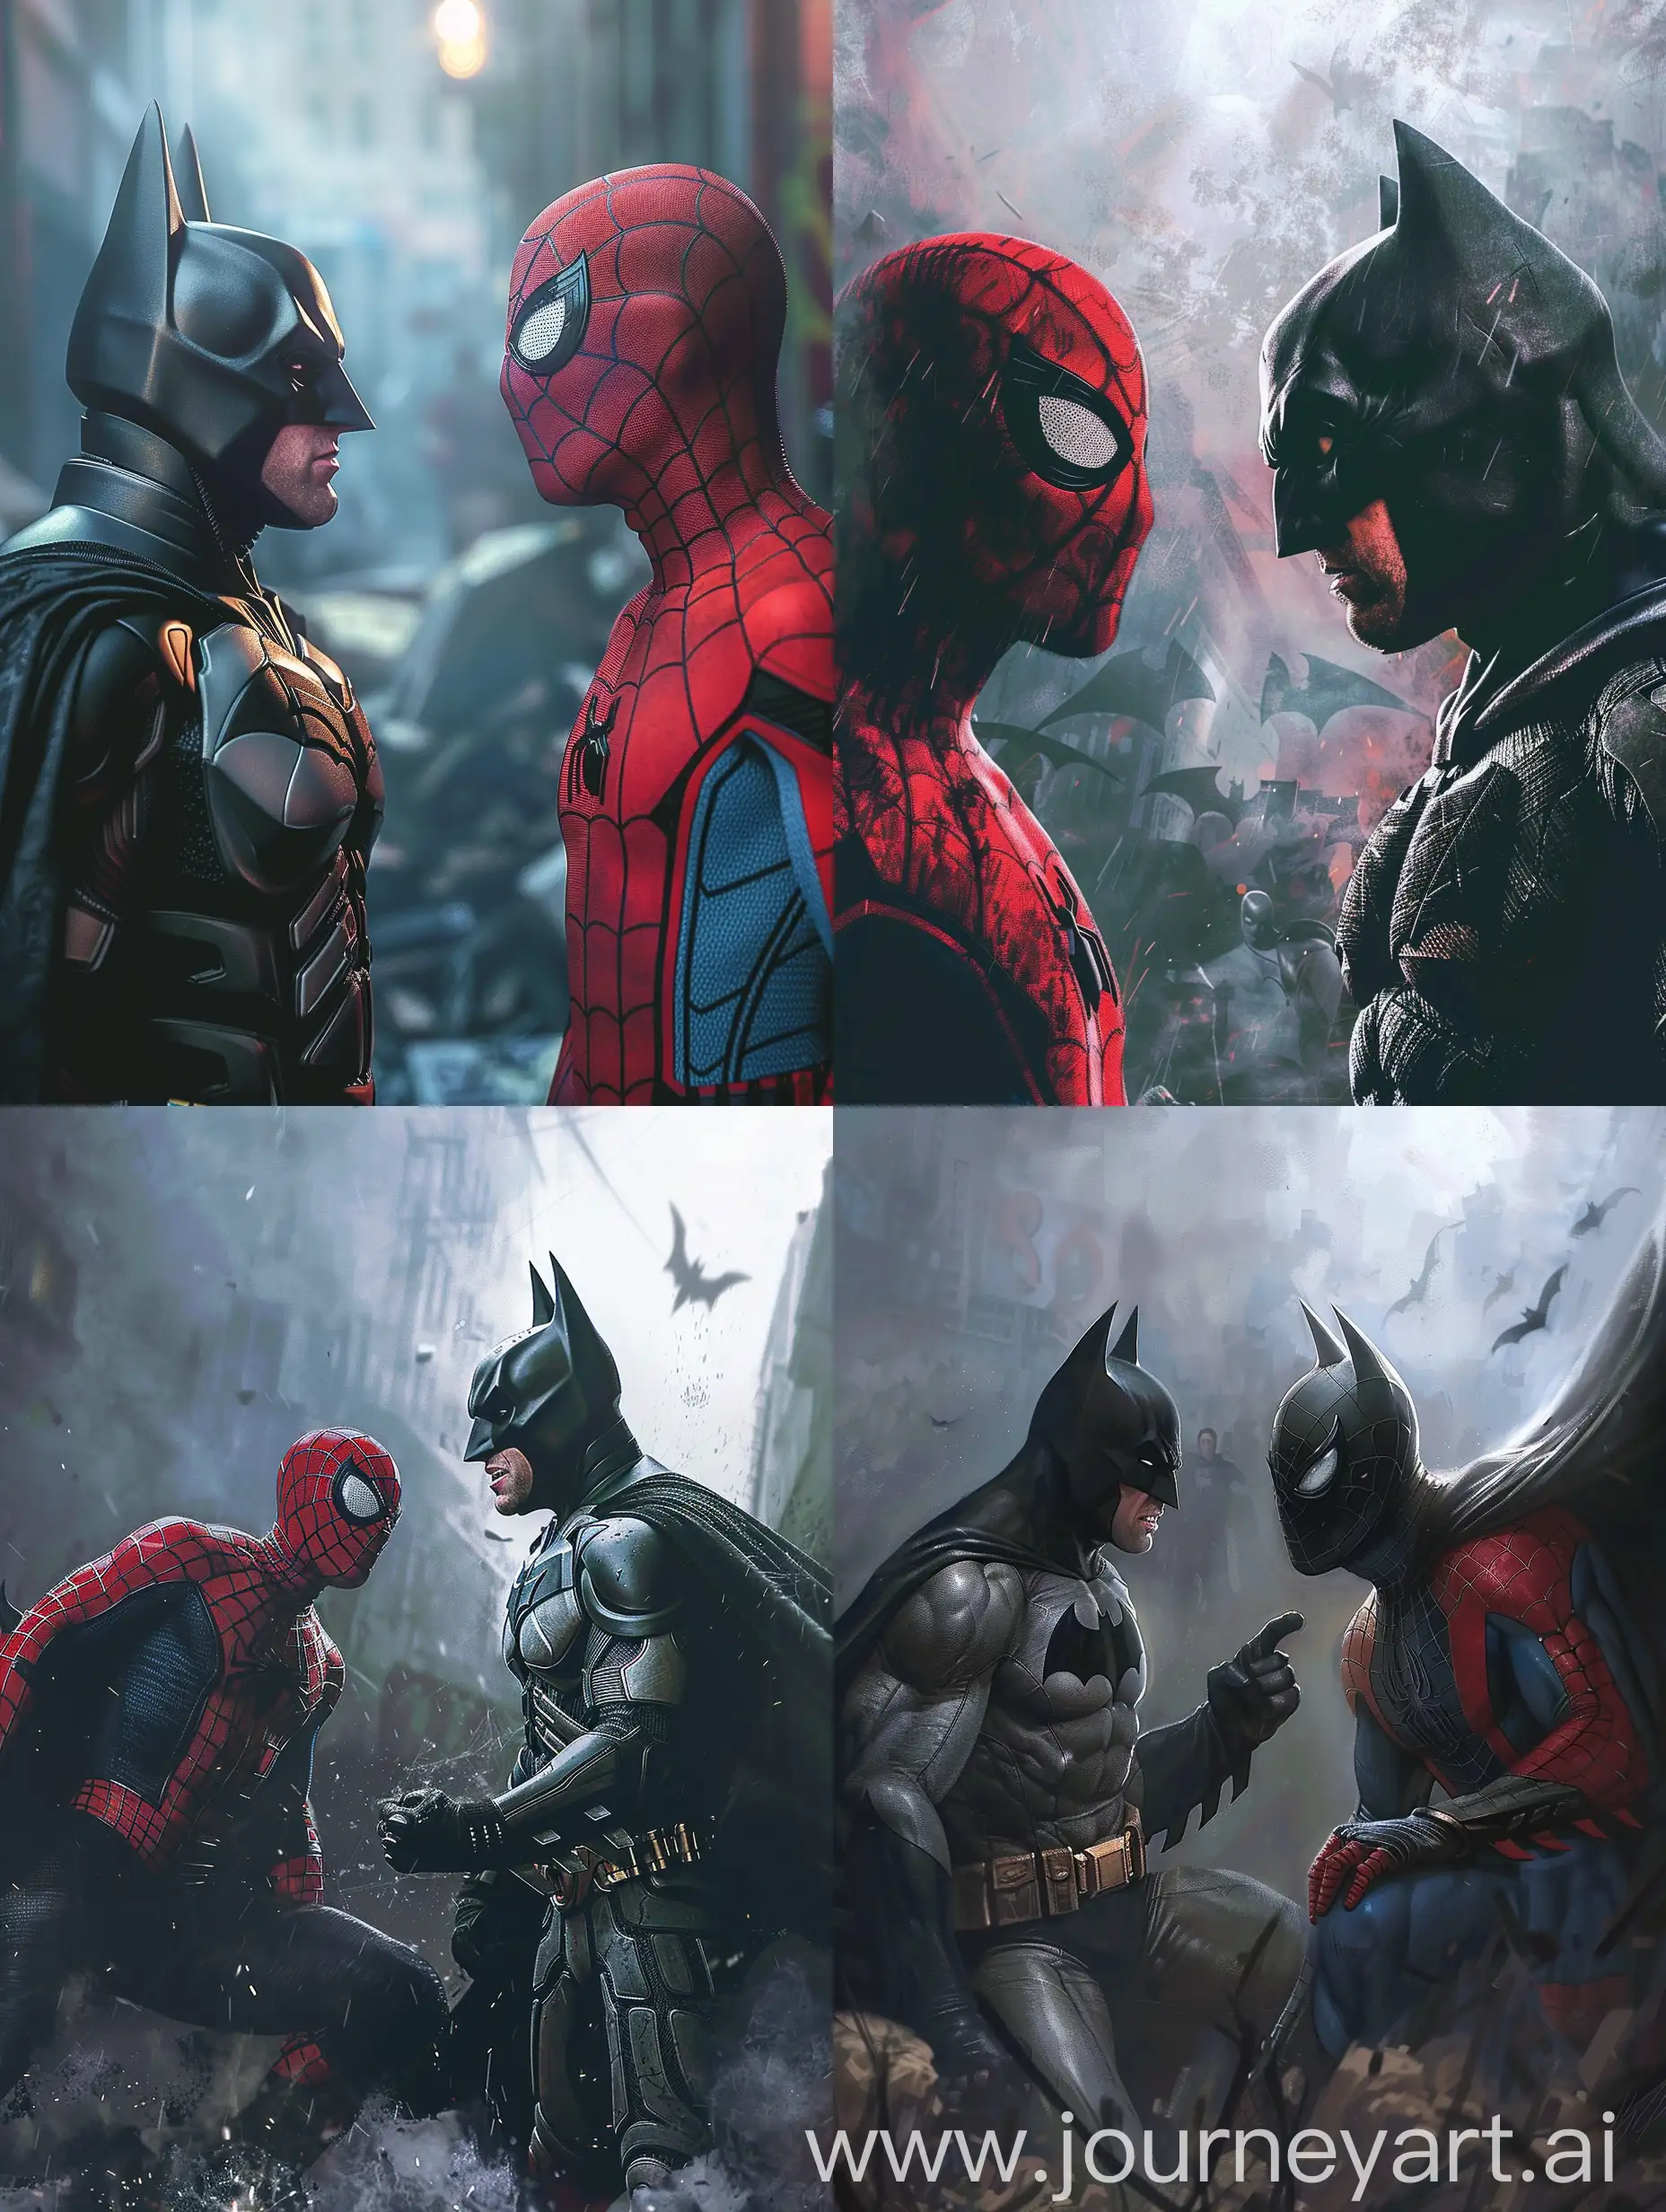 Epic-8K-Resolution-Batman-and-SpiderMan-ActionPacked-Encounter